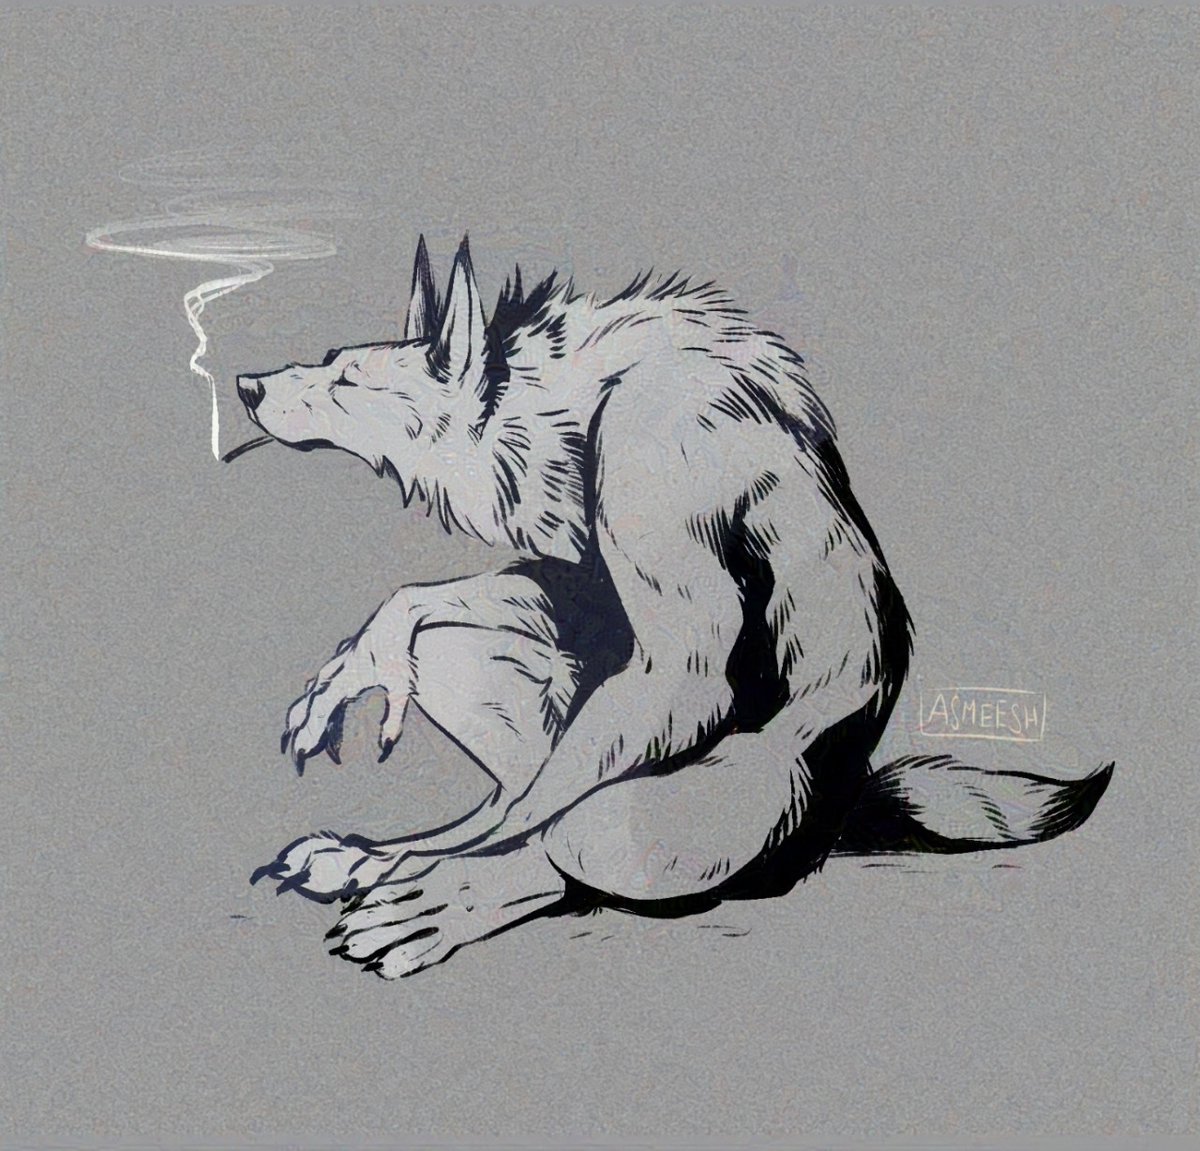 Still a bit too busy for personal work, so here's one of my old grumpy werewolves. 

Full moon blues.